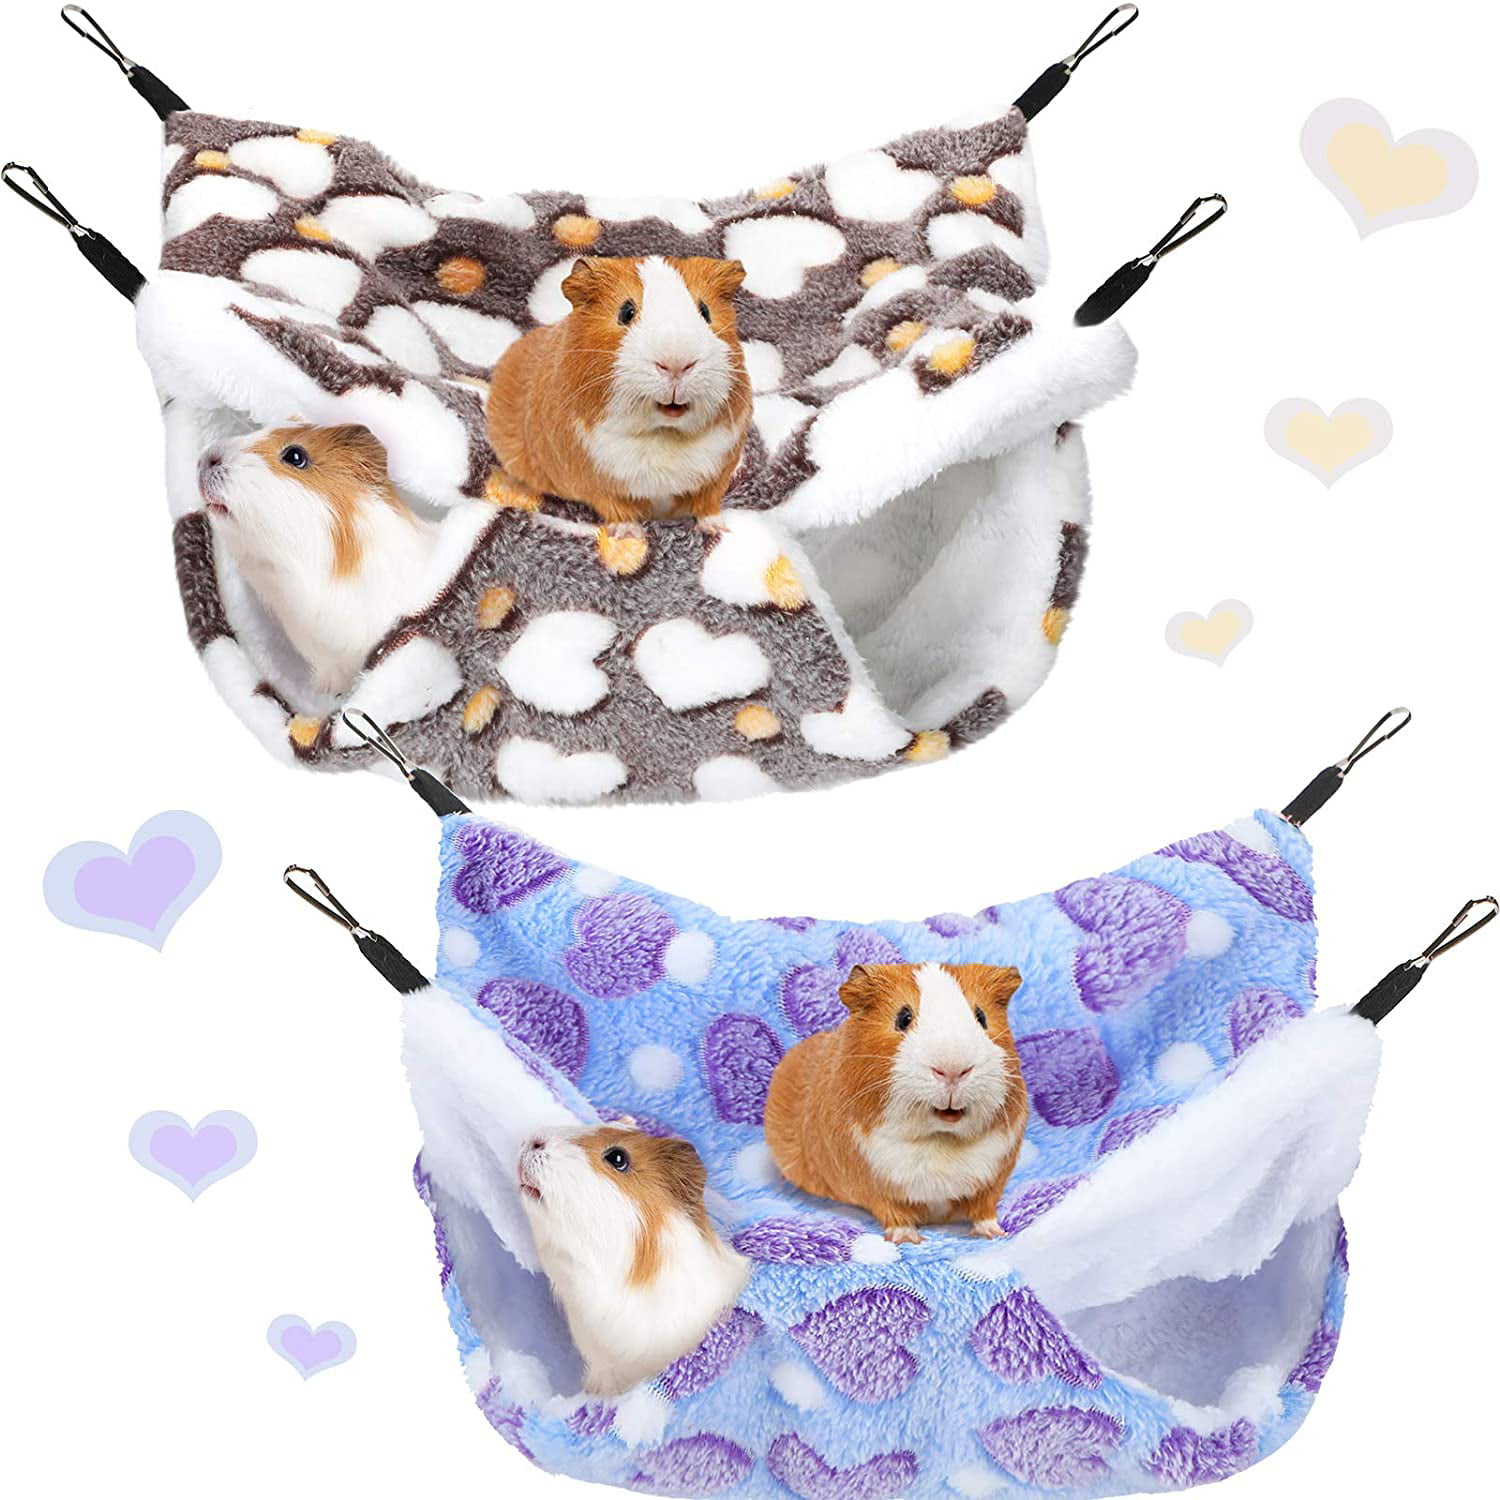 Small, Coffee Warm Hammock for Parrot Ferret Squirrel Hamster Rat Playing Sleeping Bunkbed Sugar Glider Hammock Small Pet Cage Hammock Guinea Pig Cage Accessories Bedding 